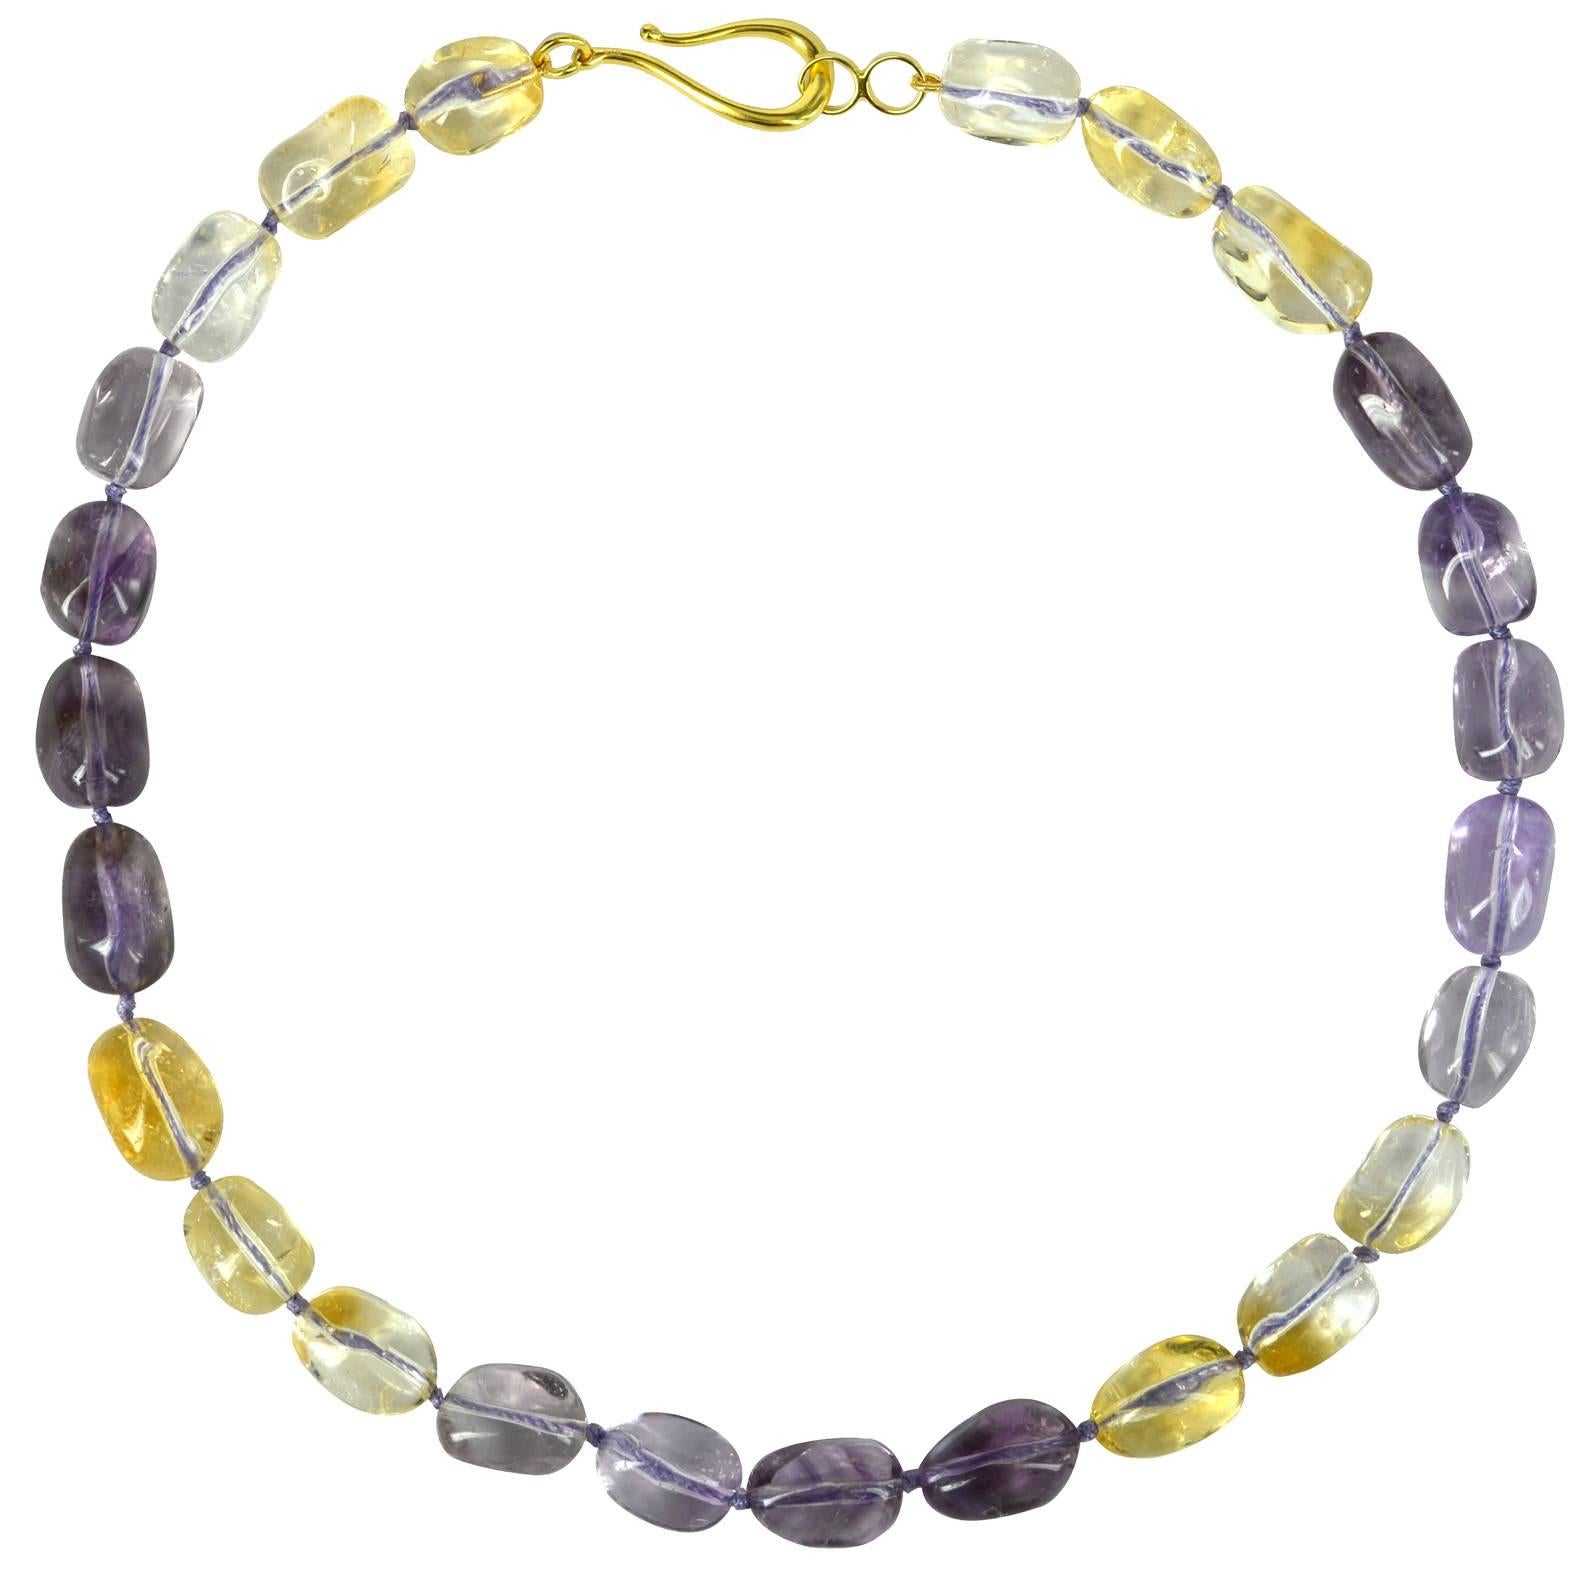 Shaded Amethyst and Citrine polished nuggets approx 16x12mm with a 40mm Gold Plate Sterling Silver hook Clasp, hand knotted for strength and durability.

Finished necklace measures 49.5cm.

Custom modification available on request